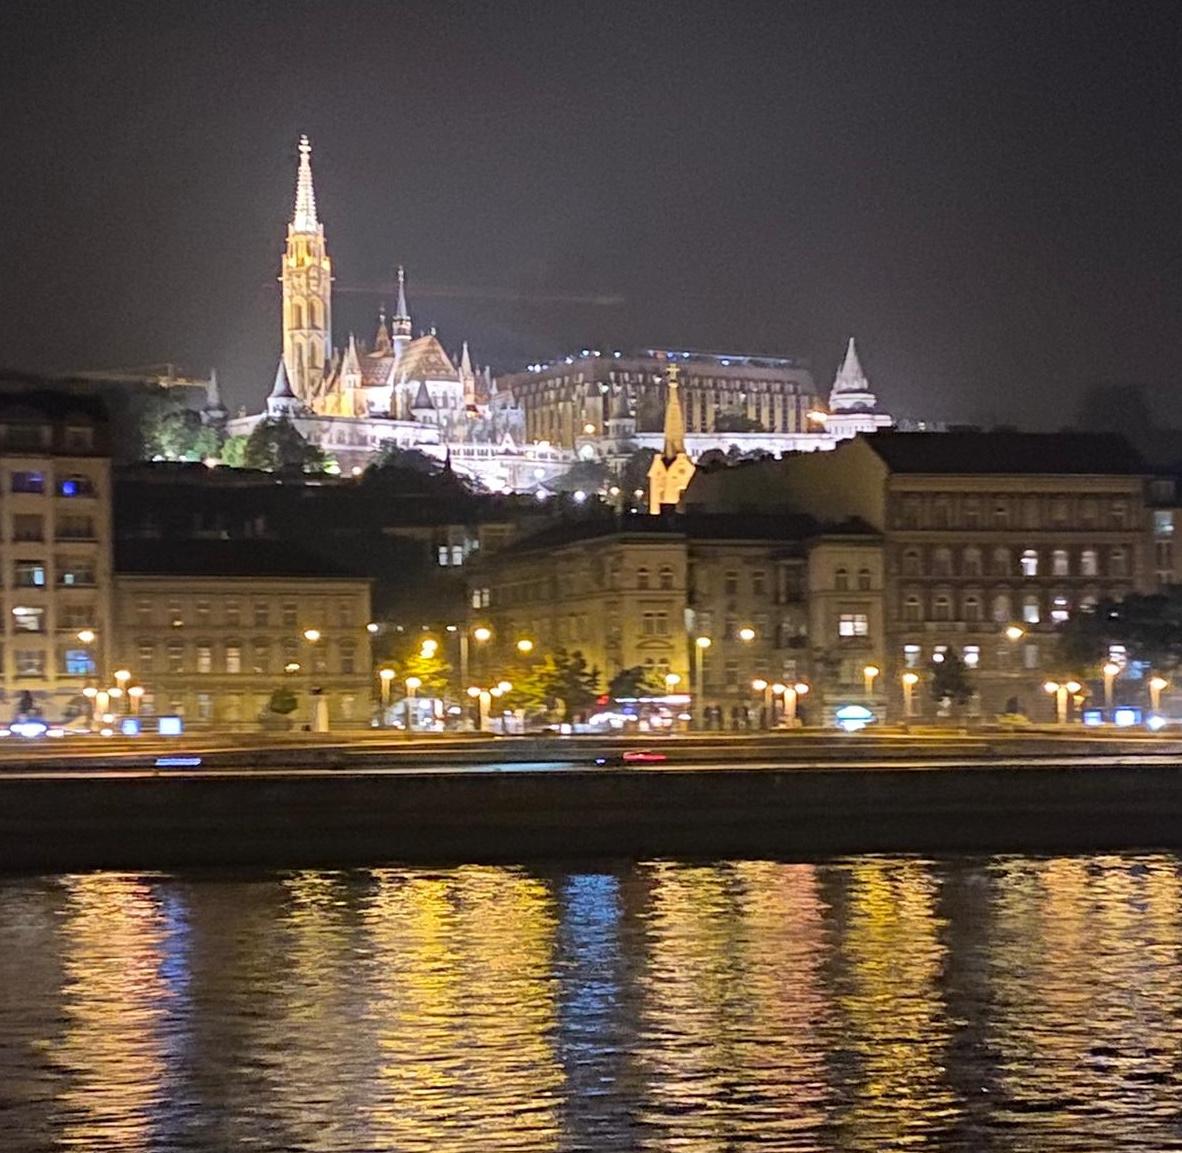 Budapest is seen at night from the cruise ship on the Danube River. (Photo courtesy of Mark Breseman)